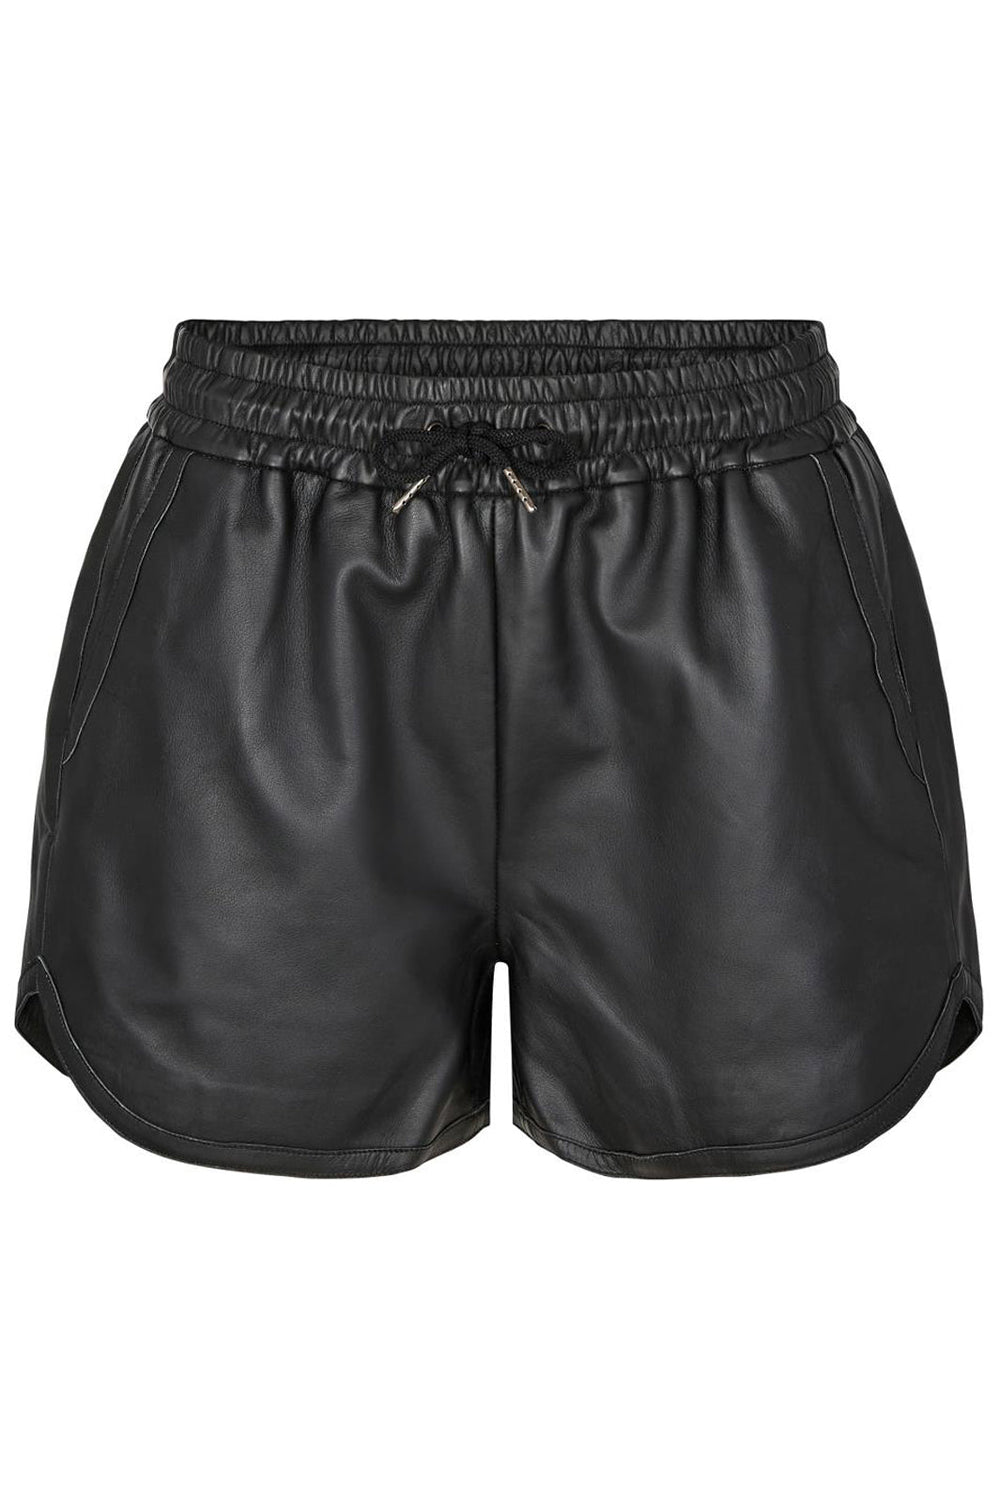 Co´couture - Phoebe Leather Crop Shorts - Black Shorts 